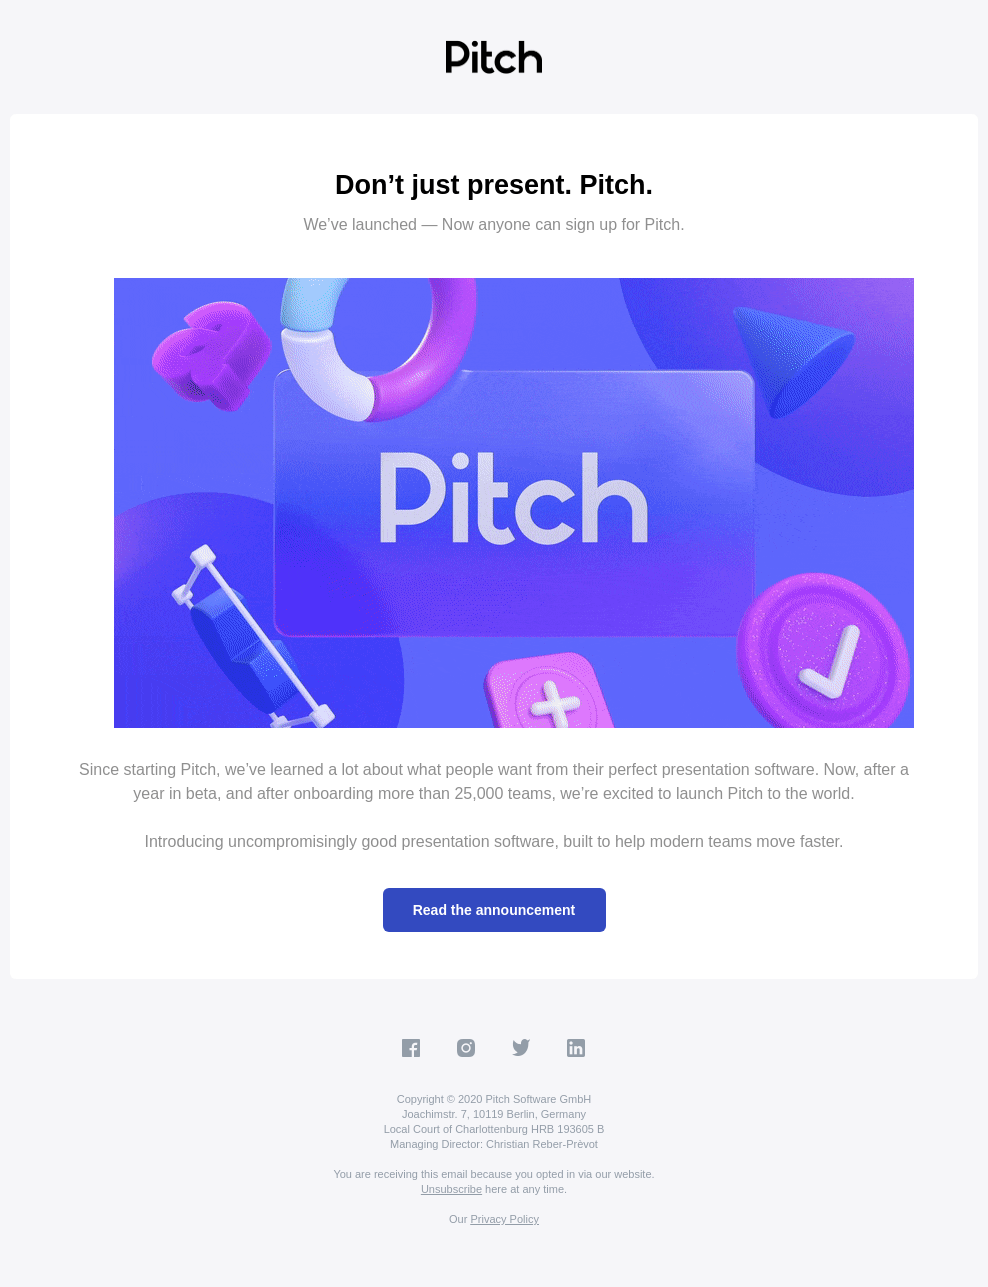 SaaS Product Launch Emails: Screenshot of Pitch's launch email